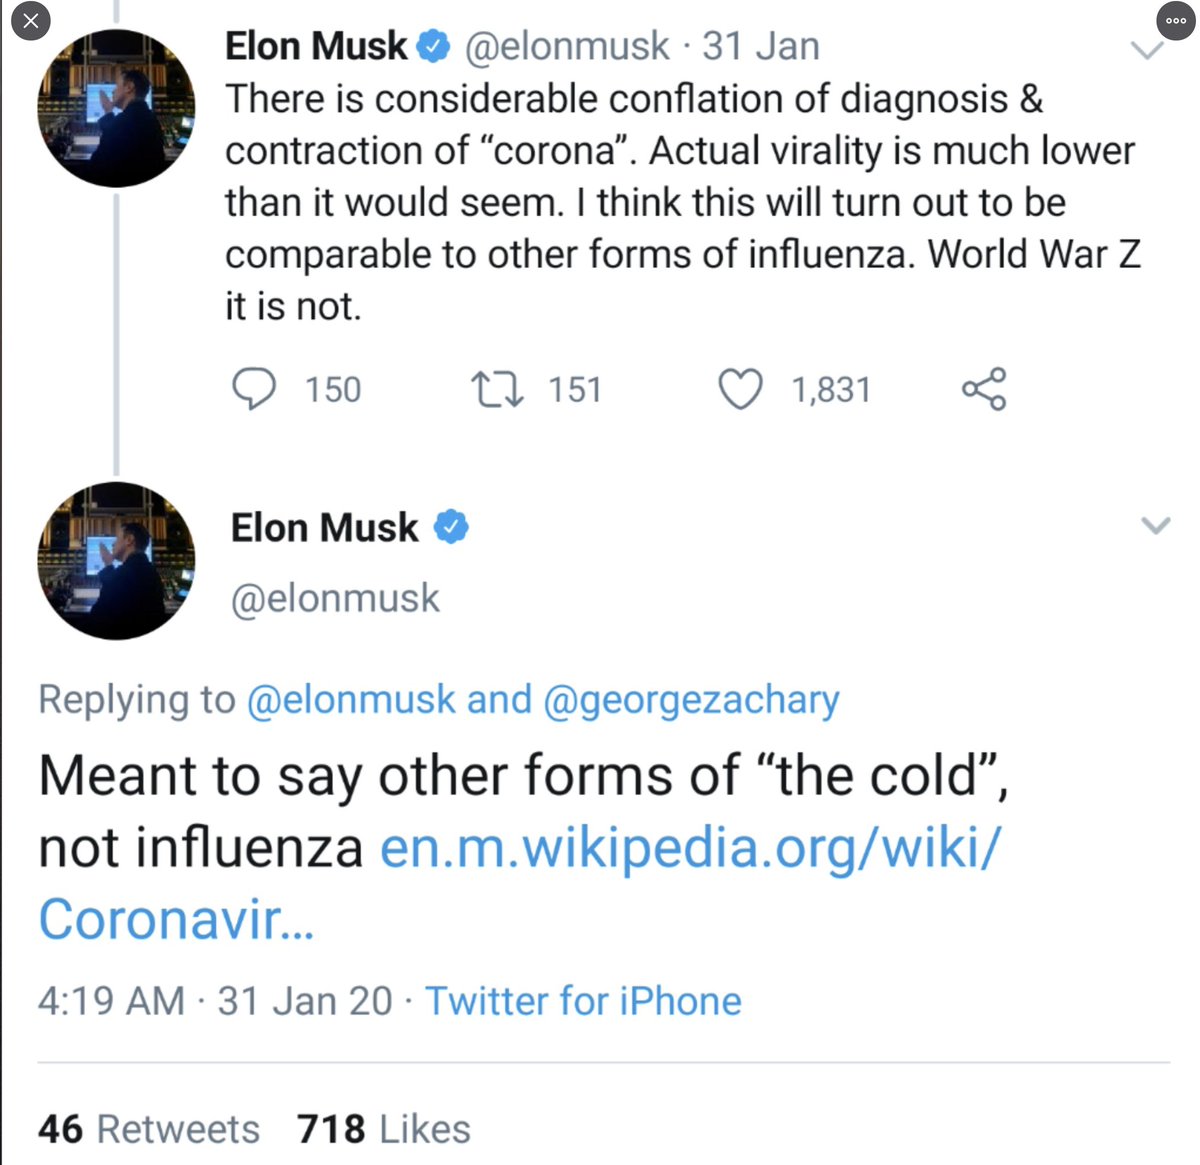 2/ Elon Musk is an expert on everything. EVERYTHING. Most recently, and epidemiologist. On January 31, Musk, with 30 million+ followers, tweeted this: